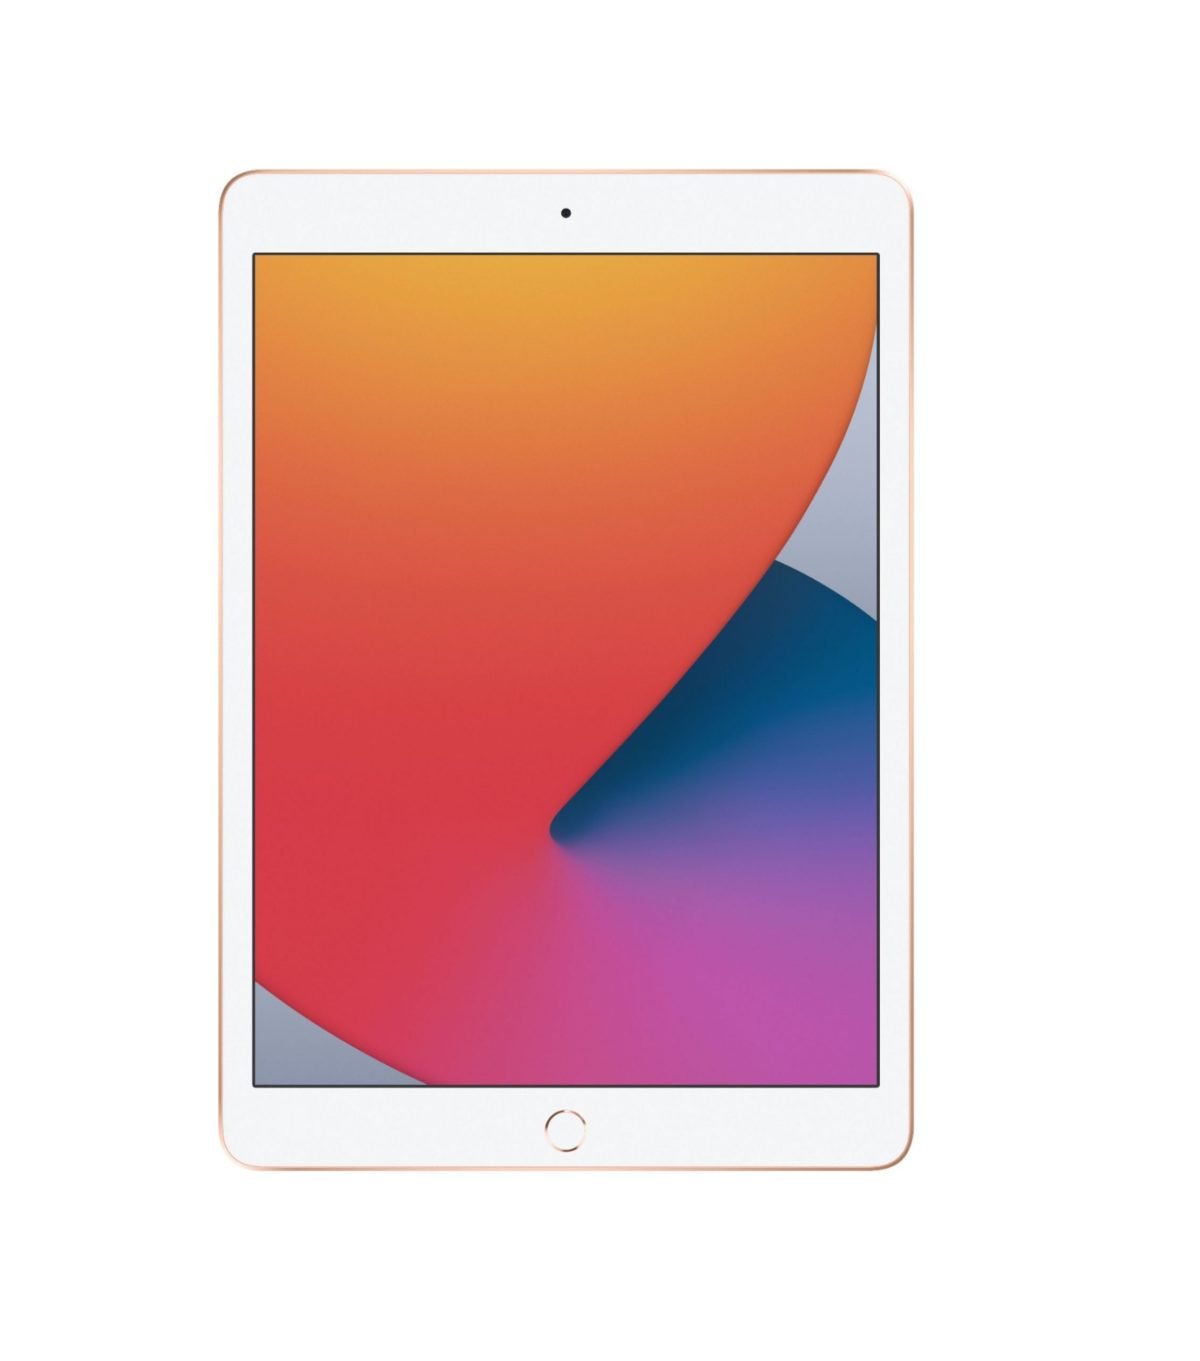 5199902 Sd Scaled Apple &Lt;Div Class=&Quot;Sku-Title&Quot;&Gt; &Lt;H1 Class=&Quot;Heading-5 V-Fw-Regular&Quot;&Gt;Apple - 10.2-Inch Ipad - Latest Model - (8Th Generation) With Wi-Fi - 128Gb - Gold - Mylf2Ll&Lt;/H1&Gt; &Lt;/Div&Gt; &Lt;Div Class=&Quot;Product-Description&Quot;&Gt; &Lt;Div Class=&Quot;Product-Description&Quot;&Gt;The New Ipad. It'S Your Digital Notebook, Mobile Office, Photo Studio, Game Console, And Personal Cinema. The A12 Bionic Chip Can Easily Power Essential Apps And Immersive Games. So You Can Edit A Document While Researching On The Web And Making A Facetime Call To A Colleague At The Same Time. Apple Pencil Makes Note-Taking With Ipad A Breeze. Attach A Full-Size Smart Keyboard For Comfortable Typing. Go Further With Wi-Fi And Gigabit-Class Lte And All-Day Battery Life.&Lt;/Div&Gt; &Lt;/Div&Gt; Apple - 10.2-Inch Ipad Apple - 10.2-Inch Ipad - Latest Model - (8Th Generation) With Wi-Fi - 128Gb - Gold